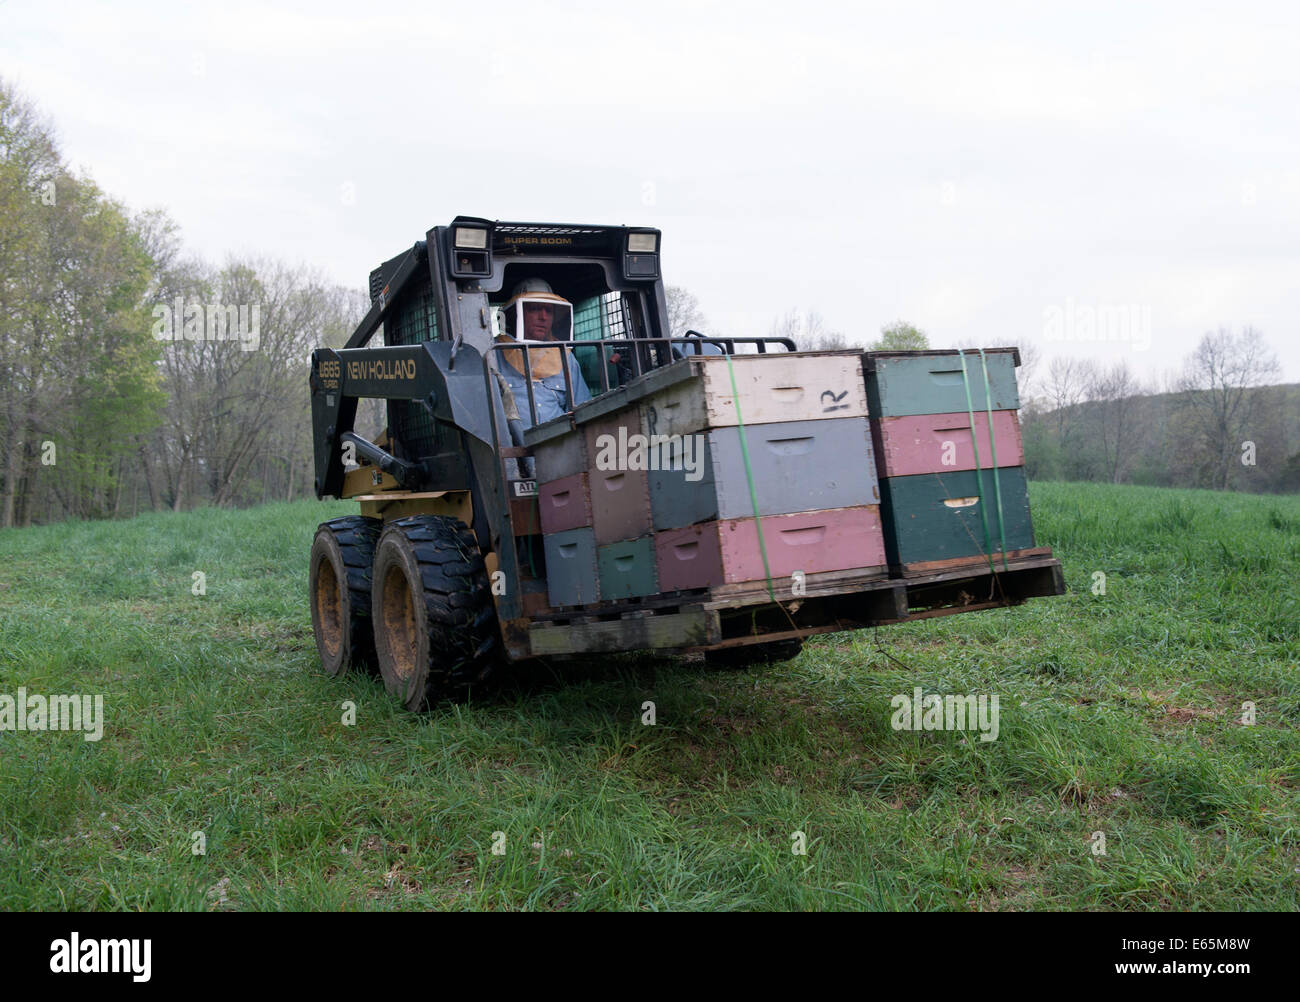 Rollie Hannan, Jr., beekeeper, uses a flatbed truck and New Holland LX665 steer skid loader to deliver hives to orchards Stock Photo